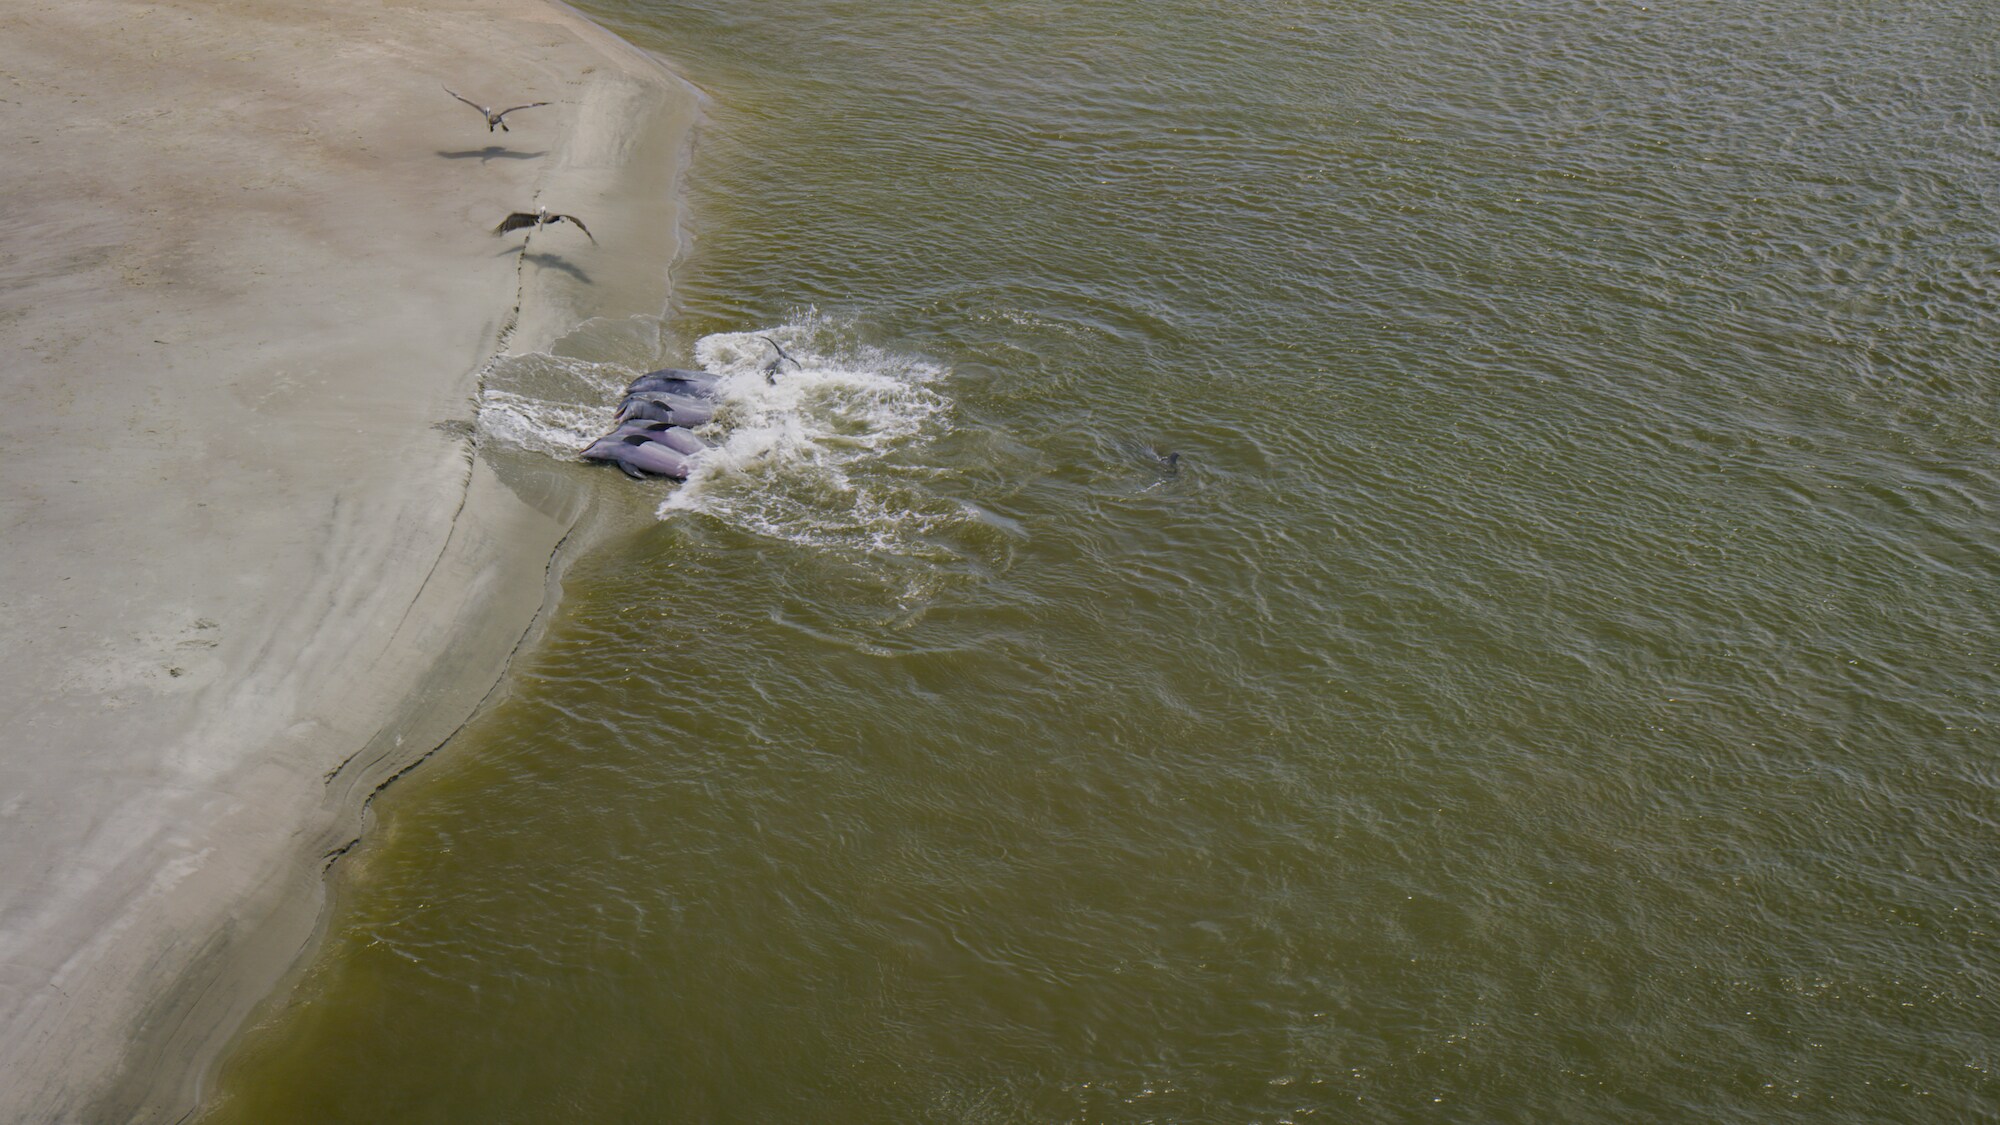 Dolphins strand feeding in Kiawah, SC. (National Geographic for Disney+)